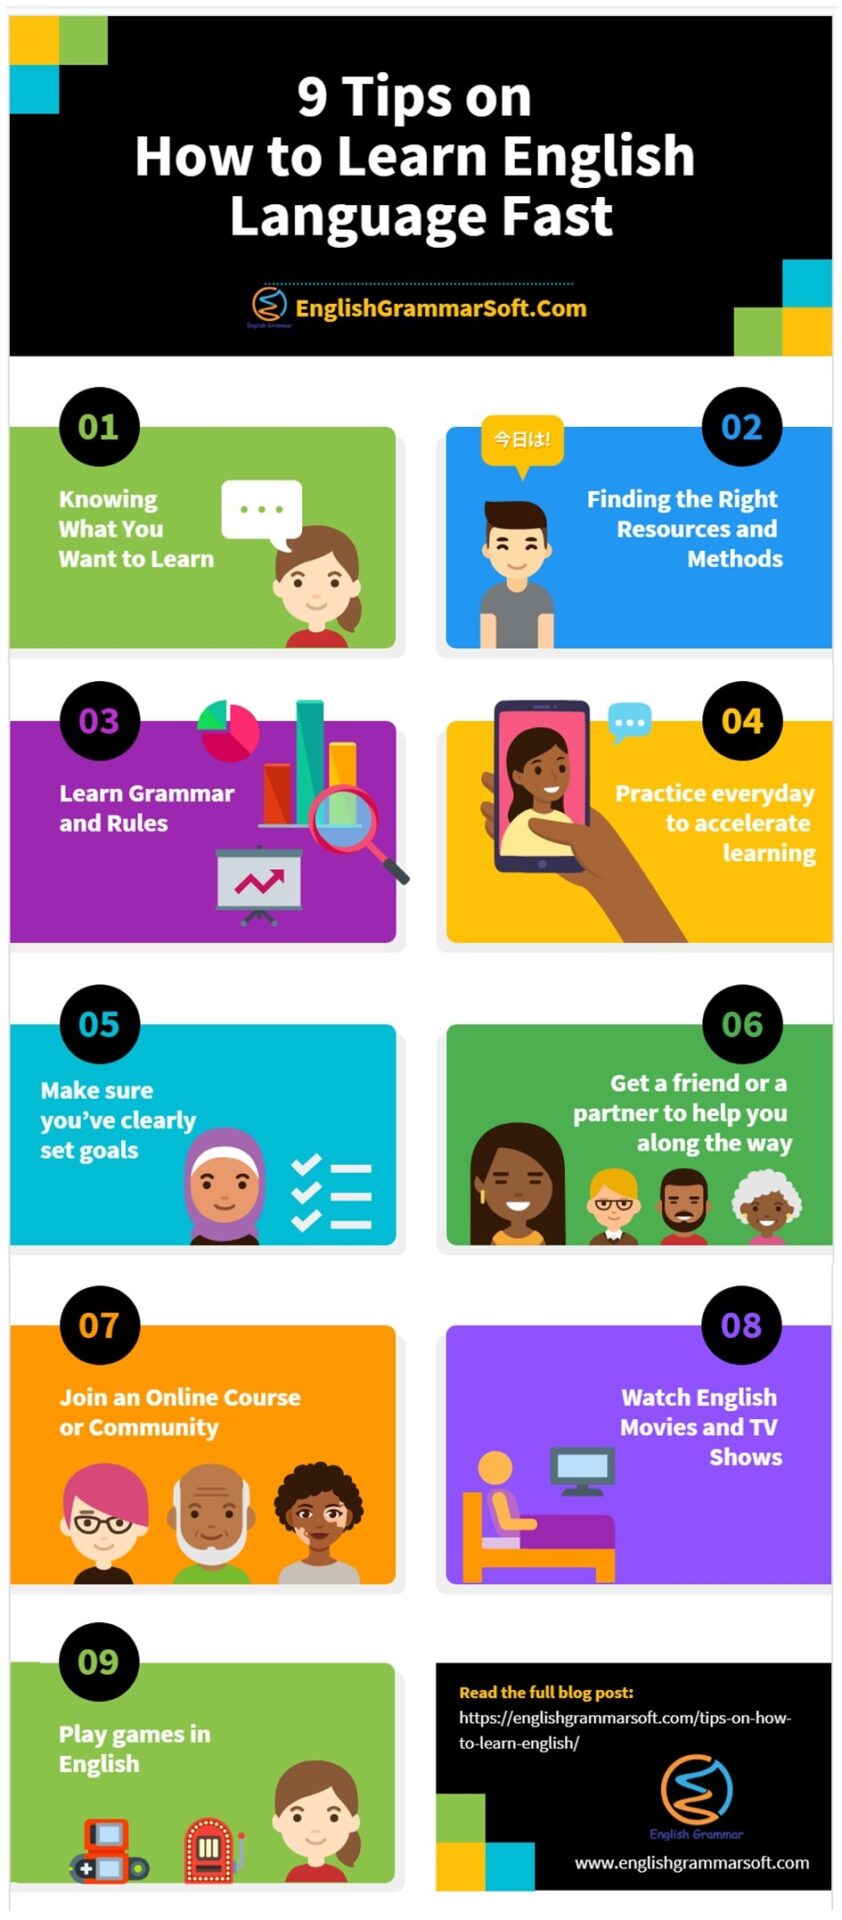 9 tips on how to learn English